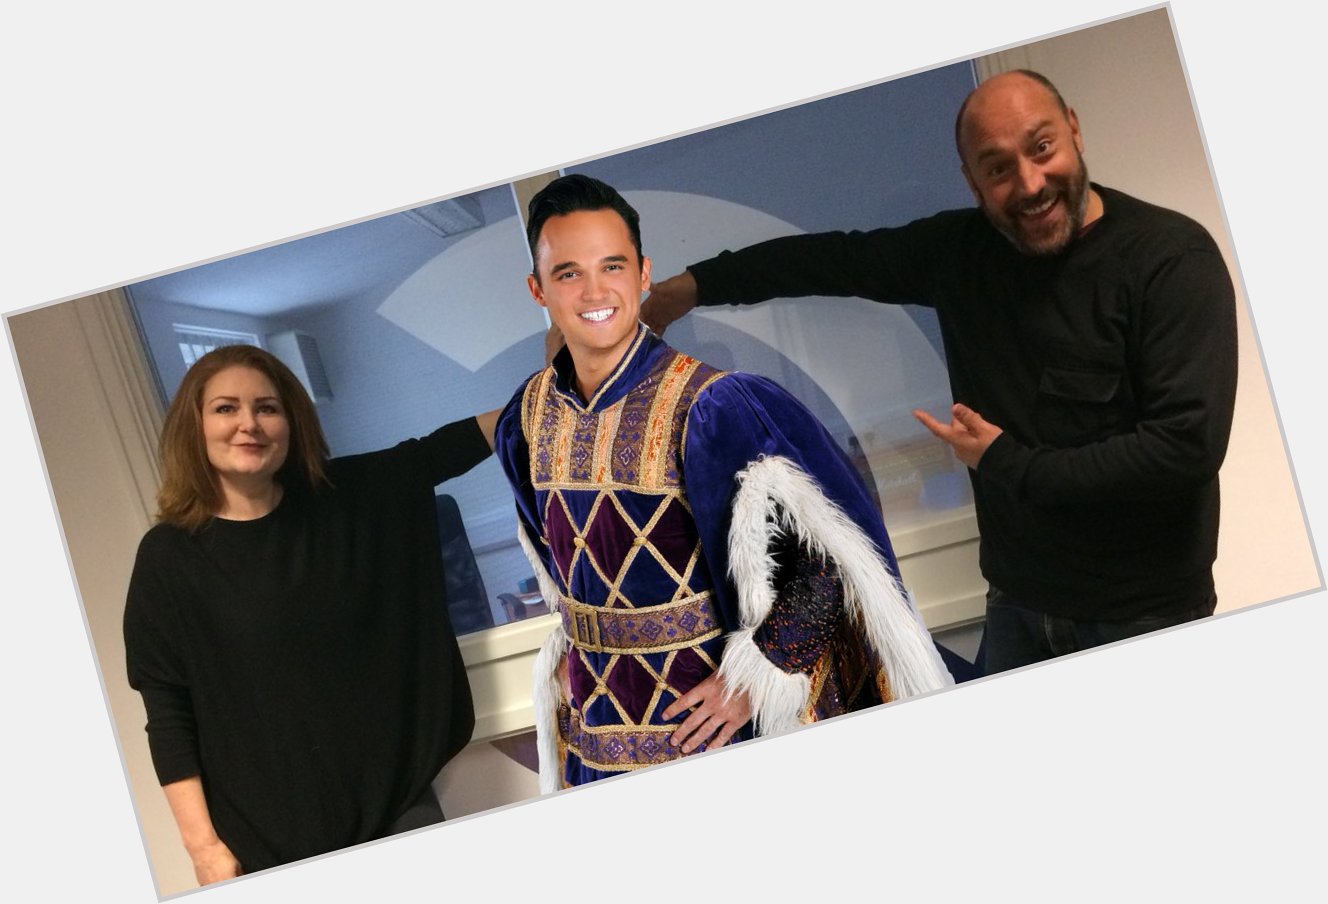 Happy Birthday to GARETH GATES! Here he is with us, dressed as Henry VIII. (Gareth, not us) 